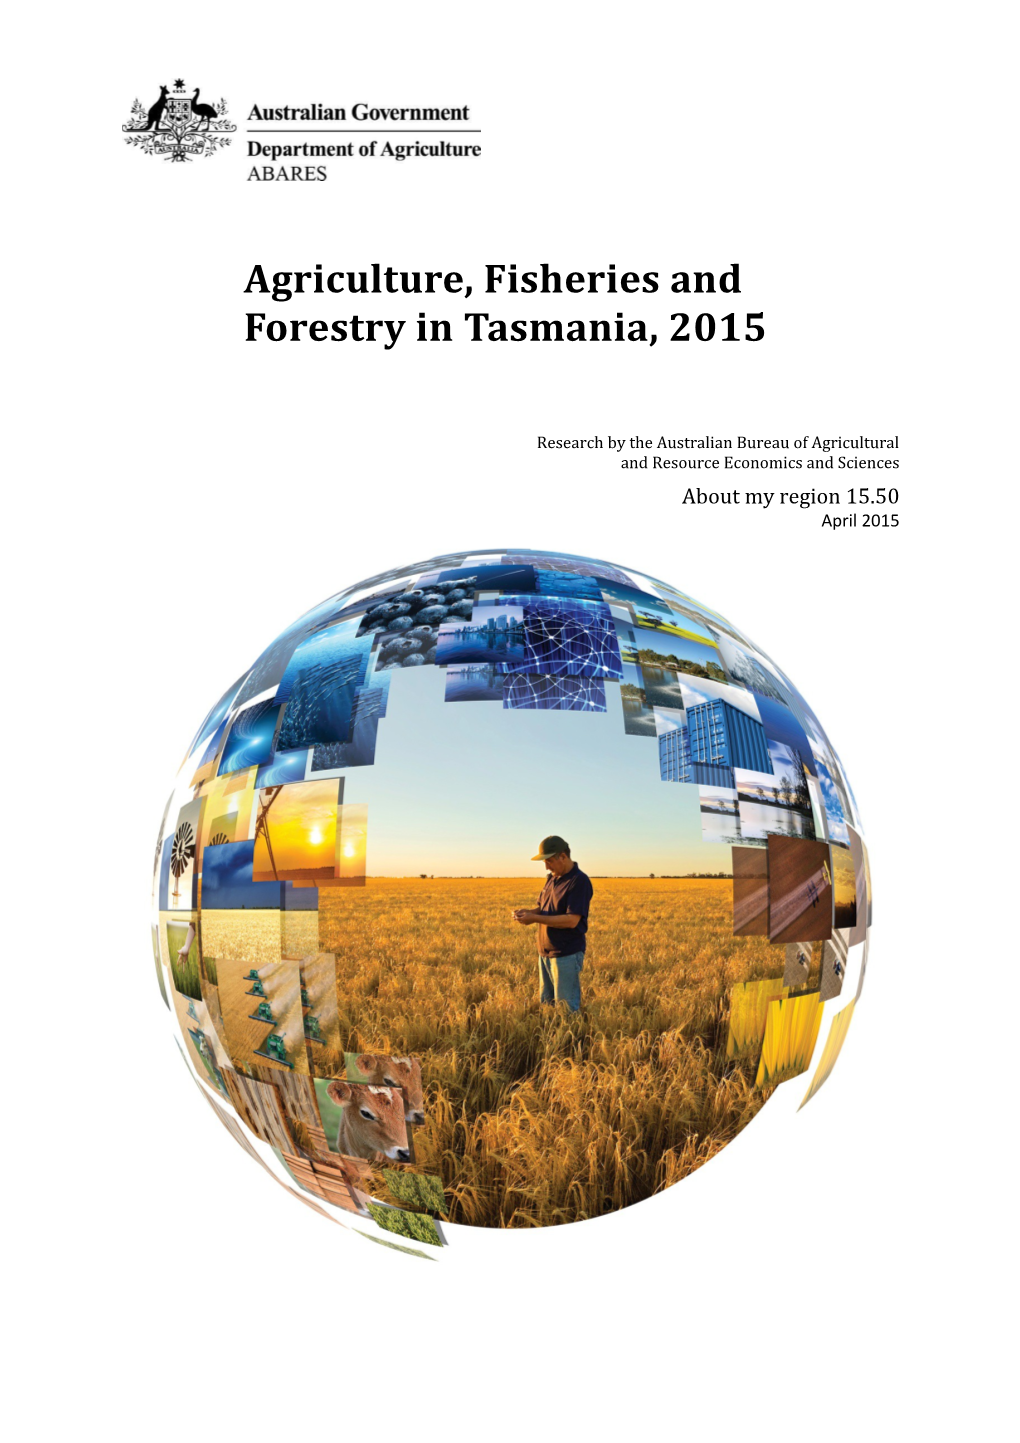 Agriculture, Fisheries and Forestry in Tasmania, 2015